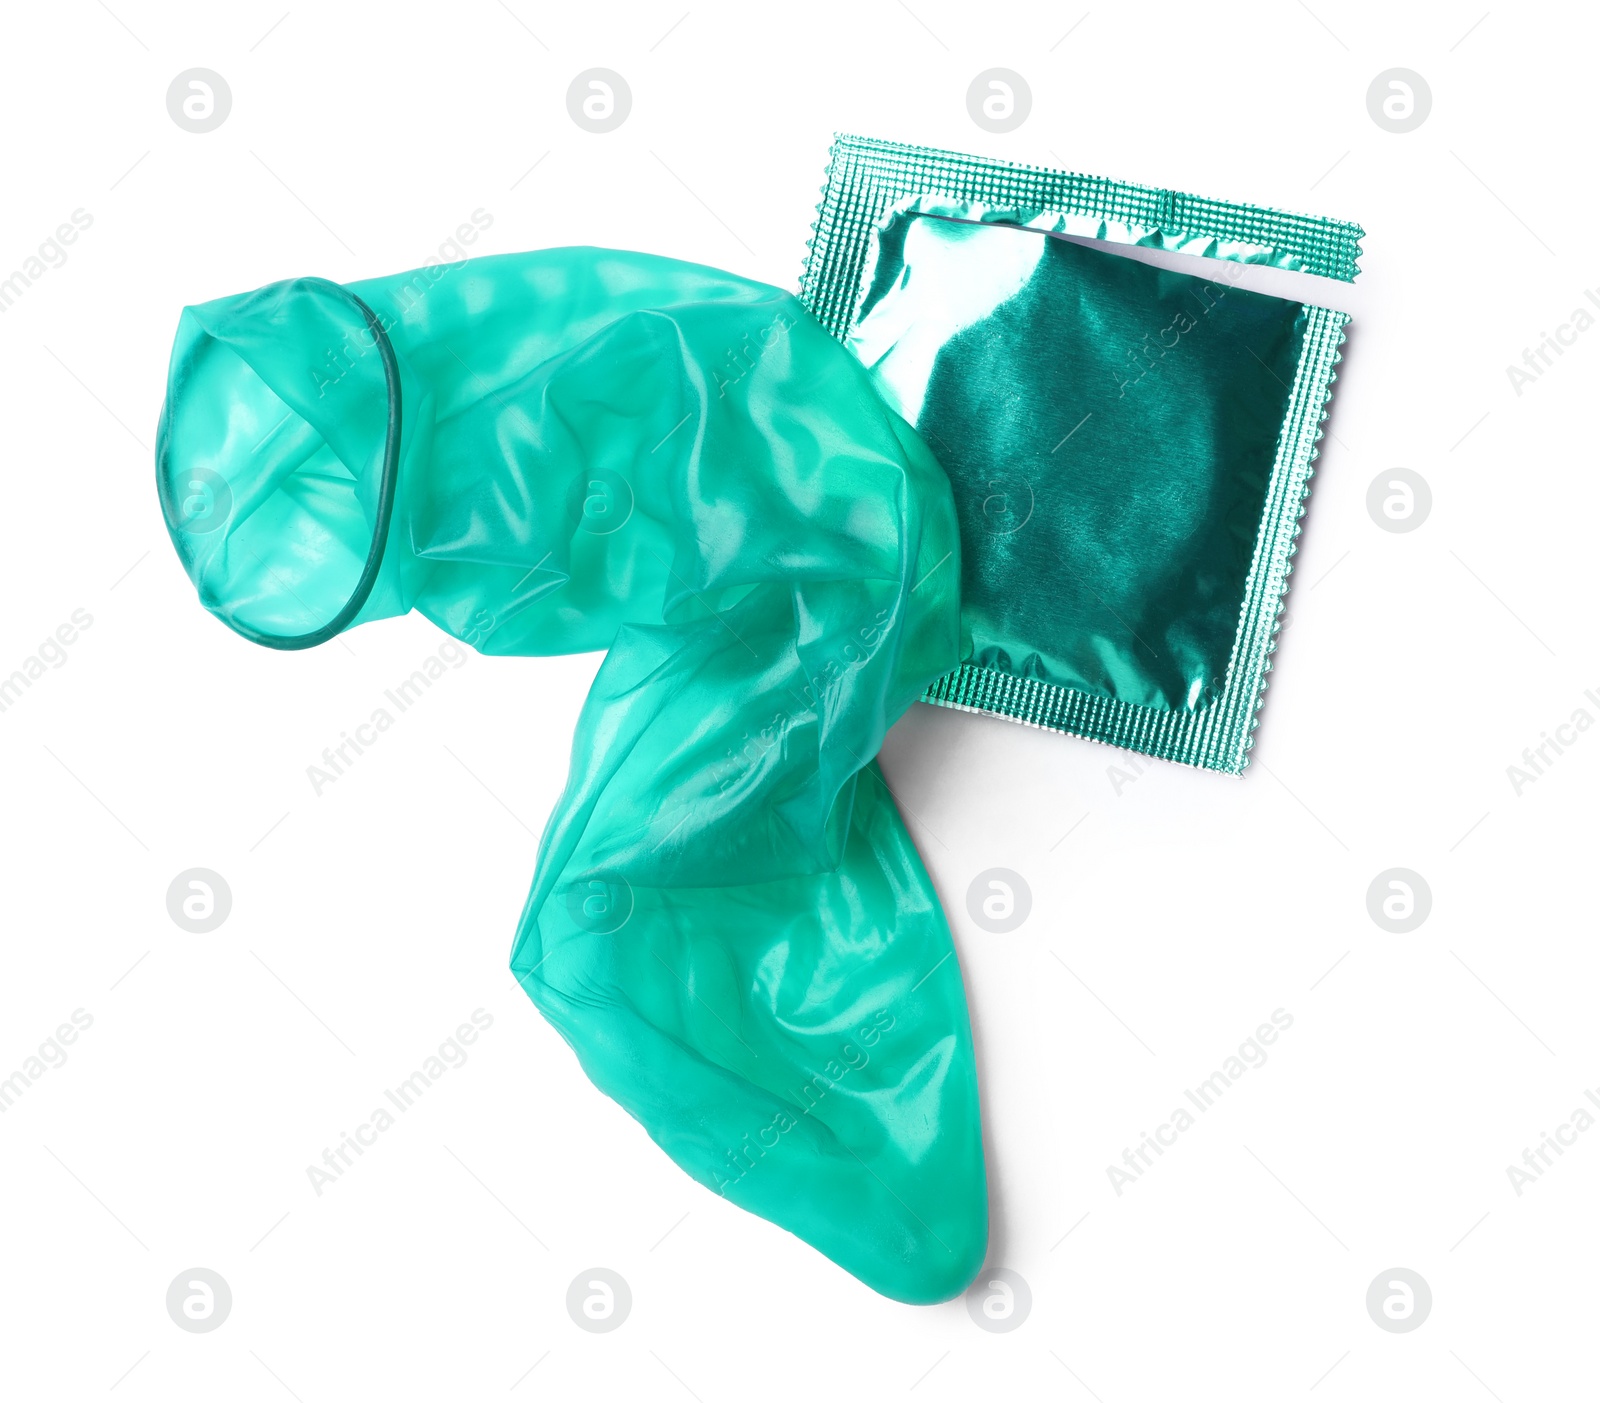 Image of Unrolled turquoise condom and package on white background, top view. Safe sex